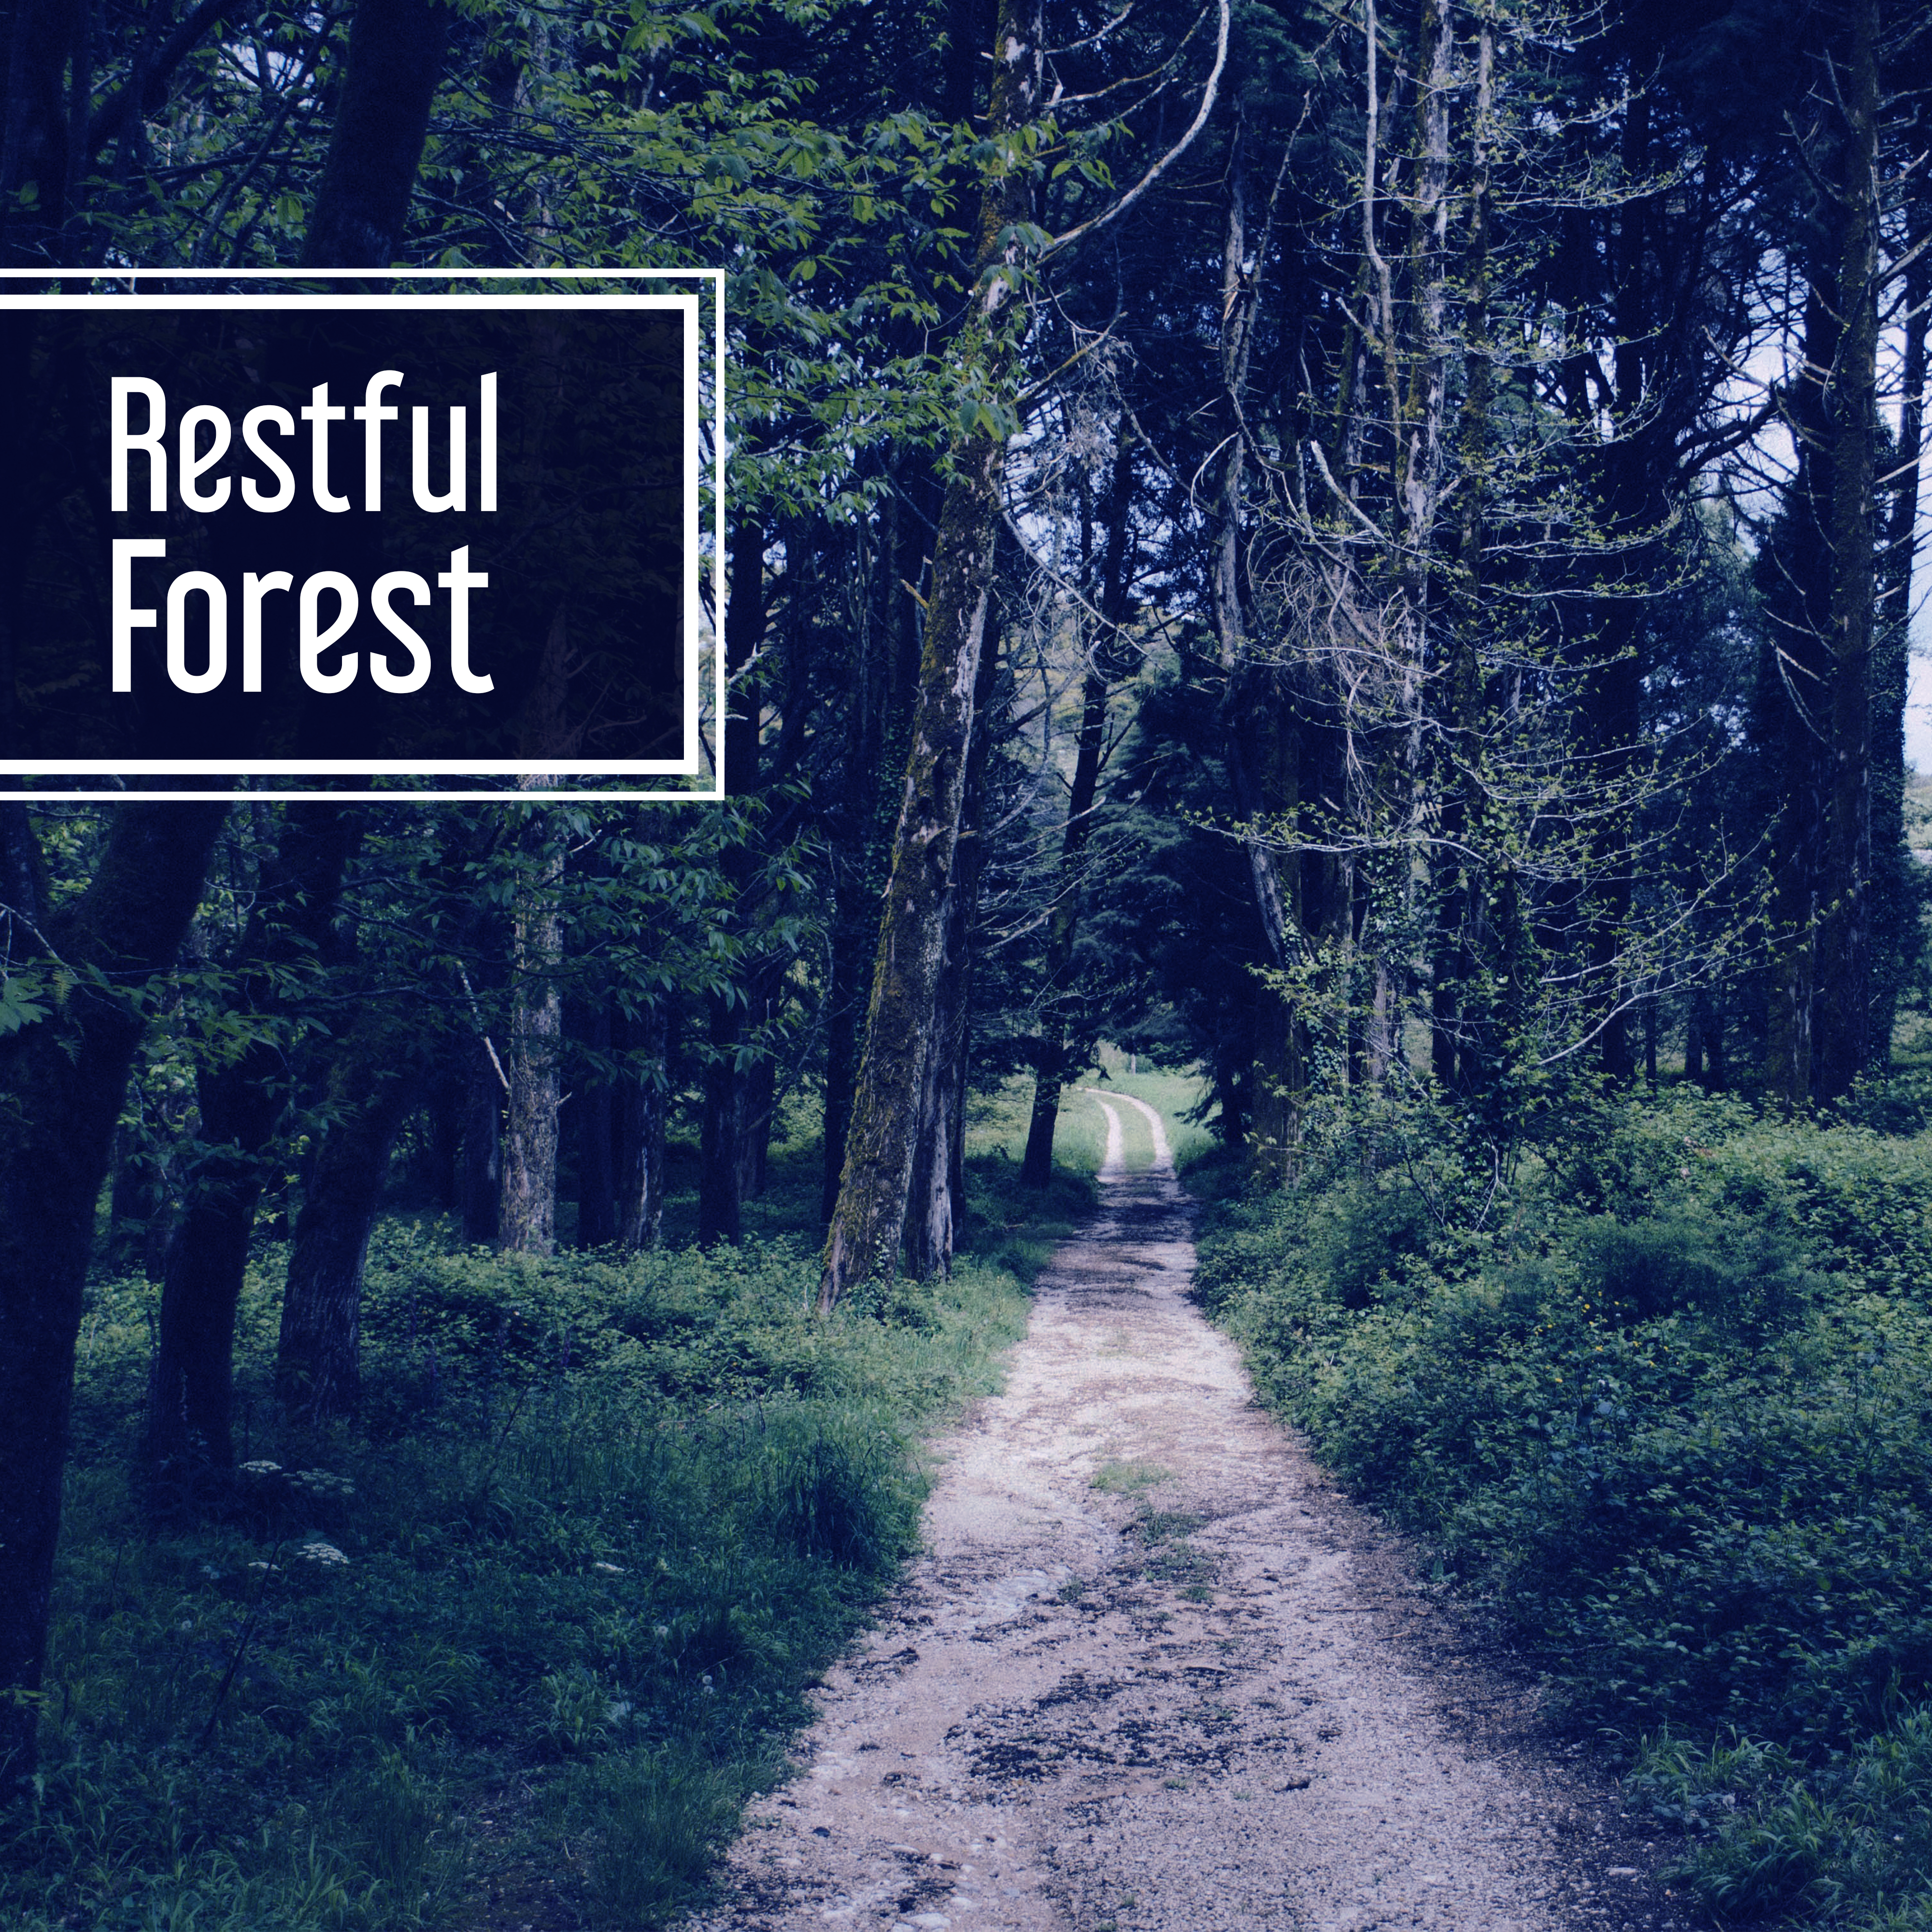 Restful Forest  Nature Sounds for Relaxation, Singing Birds, Rest with Nature, Peaceful Mind, Calmness